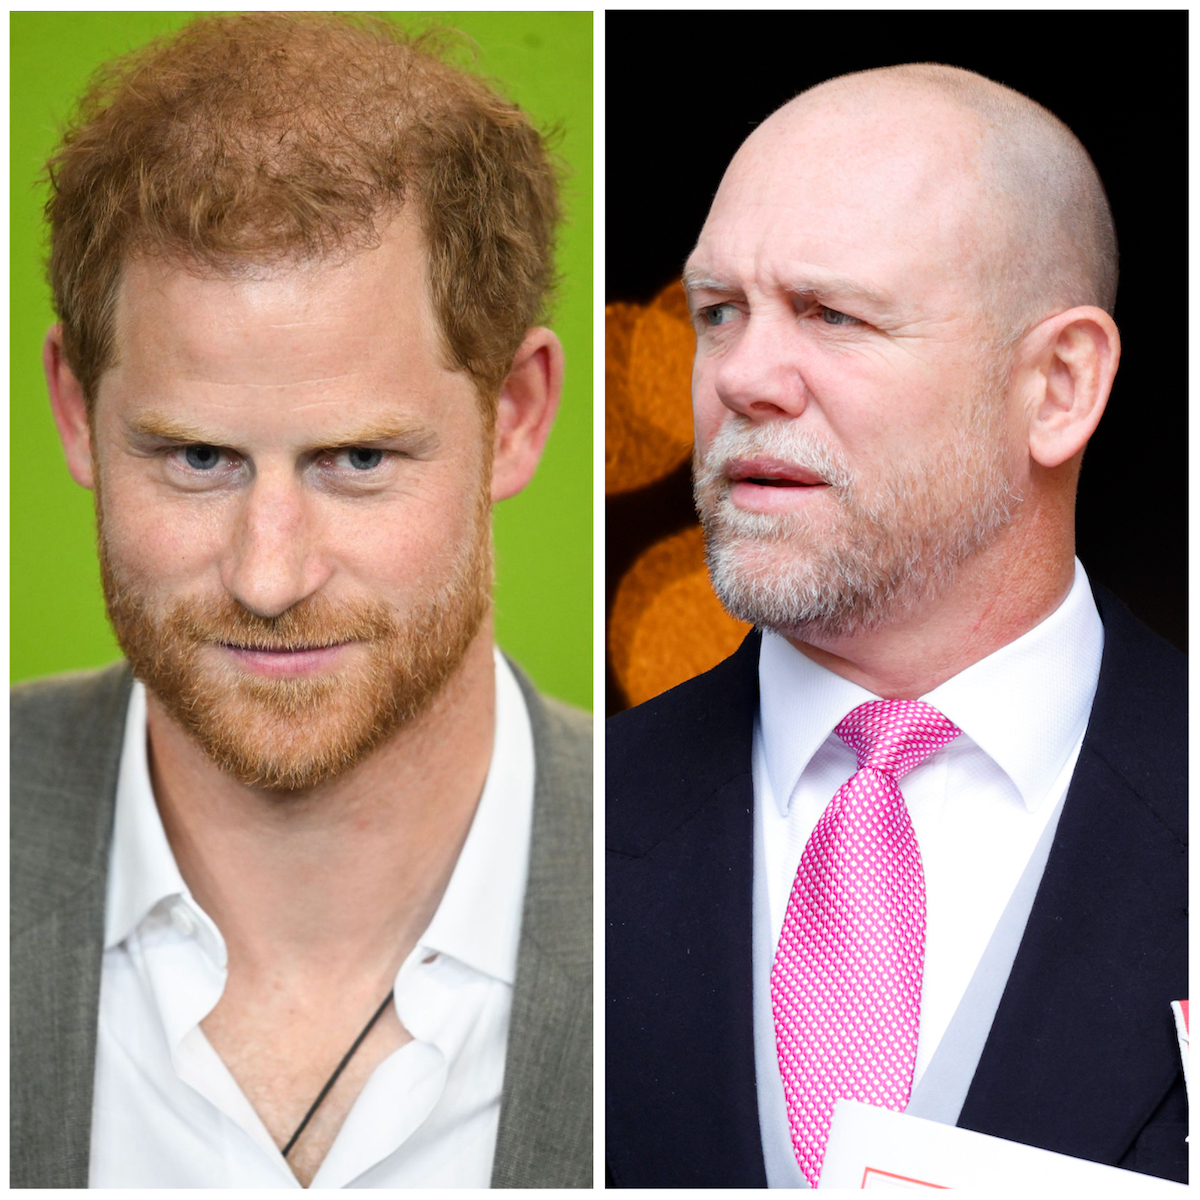 Prince Harry and Mike Tindall, whose joking can be 'risky' for the royal family, according to a body language expert, at separate events in 2022